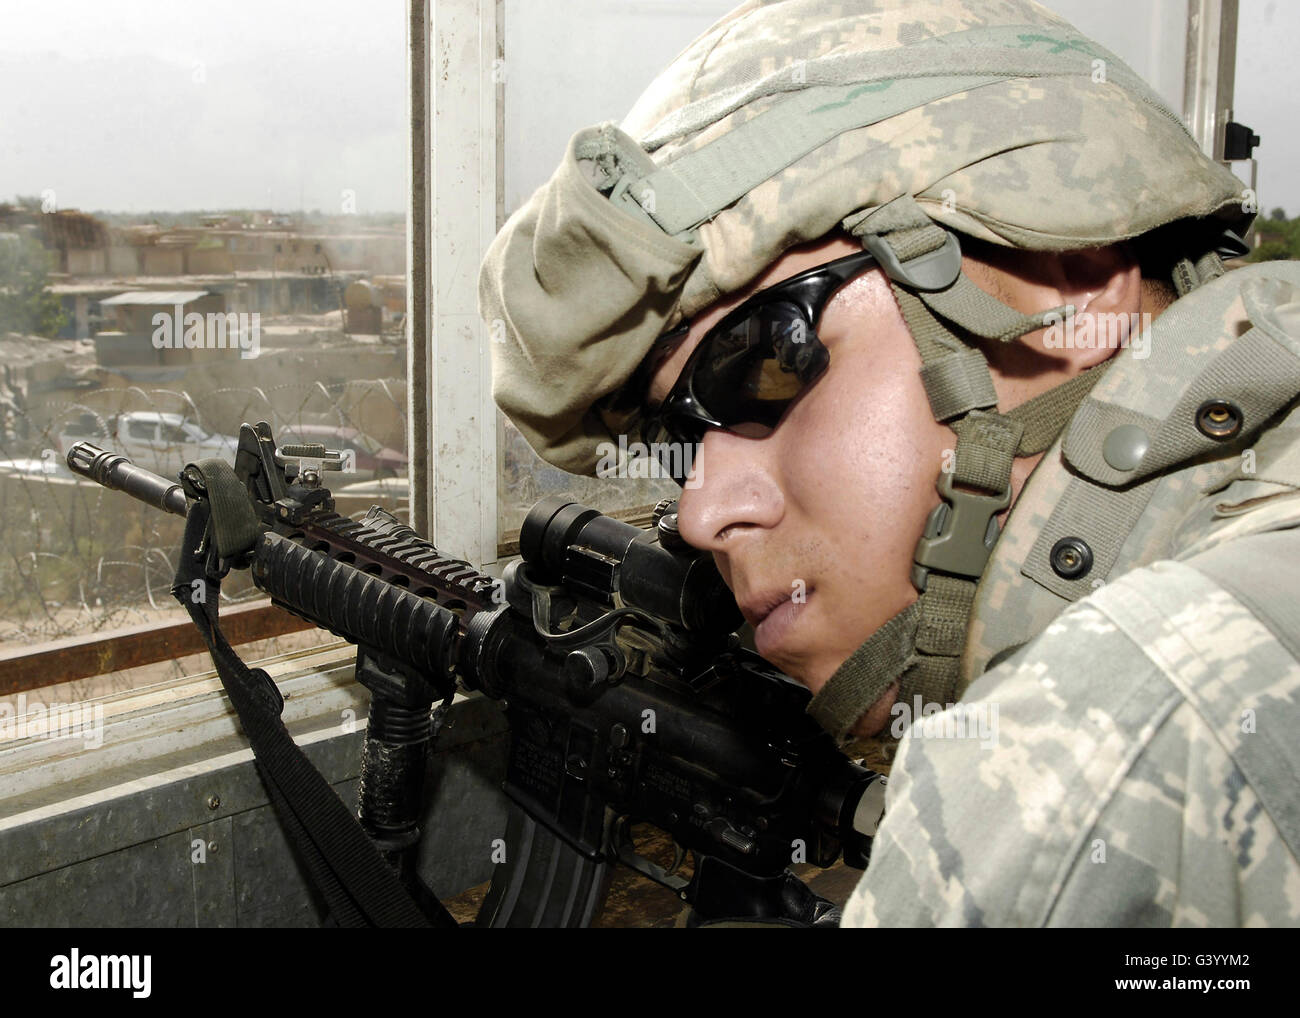 A soldier guards the perimeter of Bagram Airfield, Afghanistan. Stock Photo